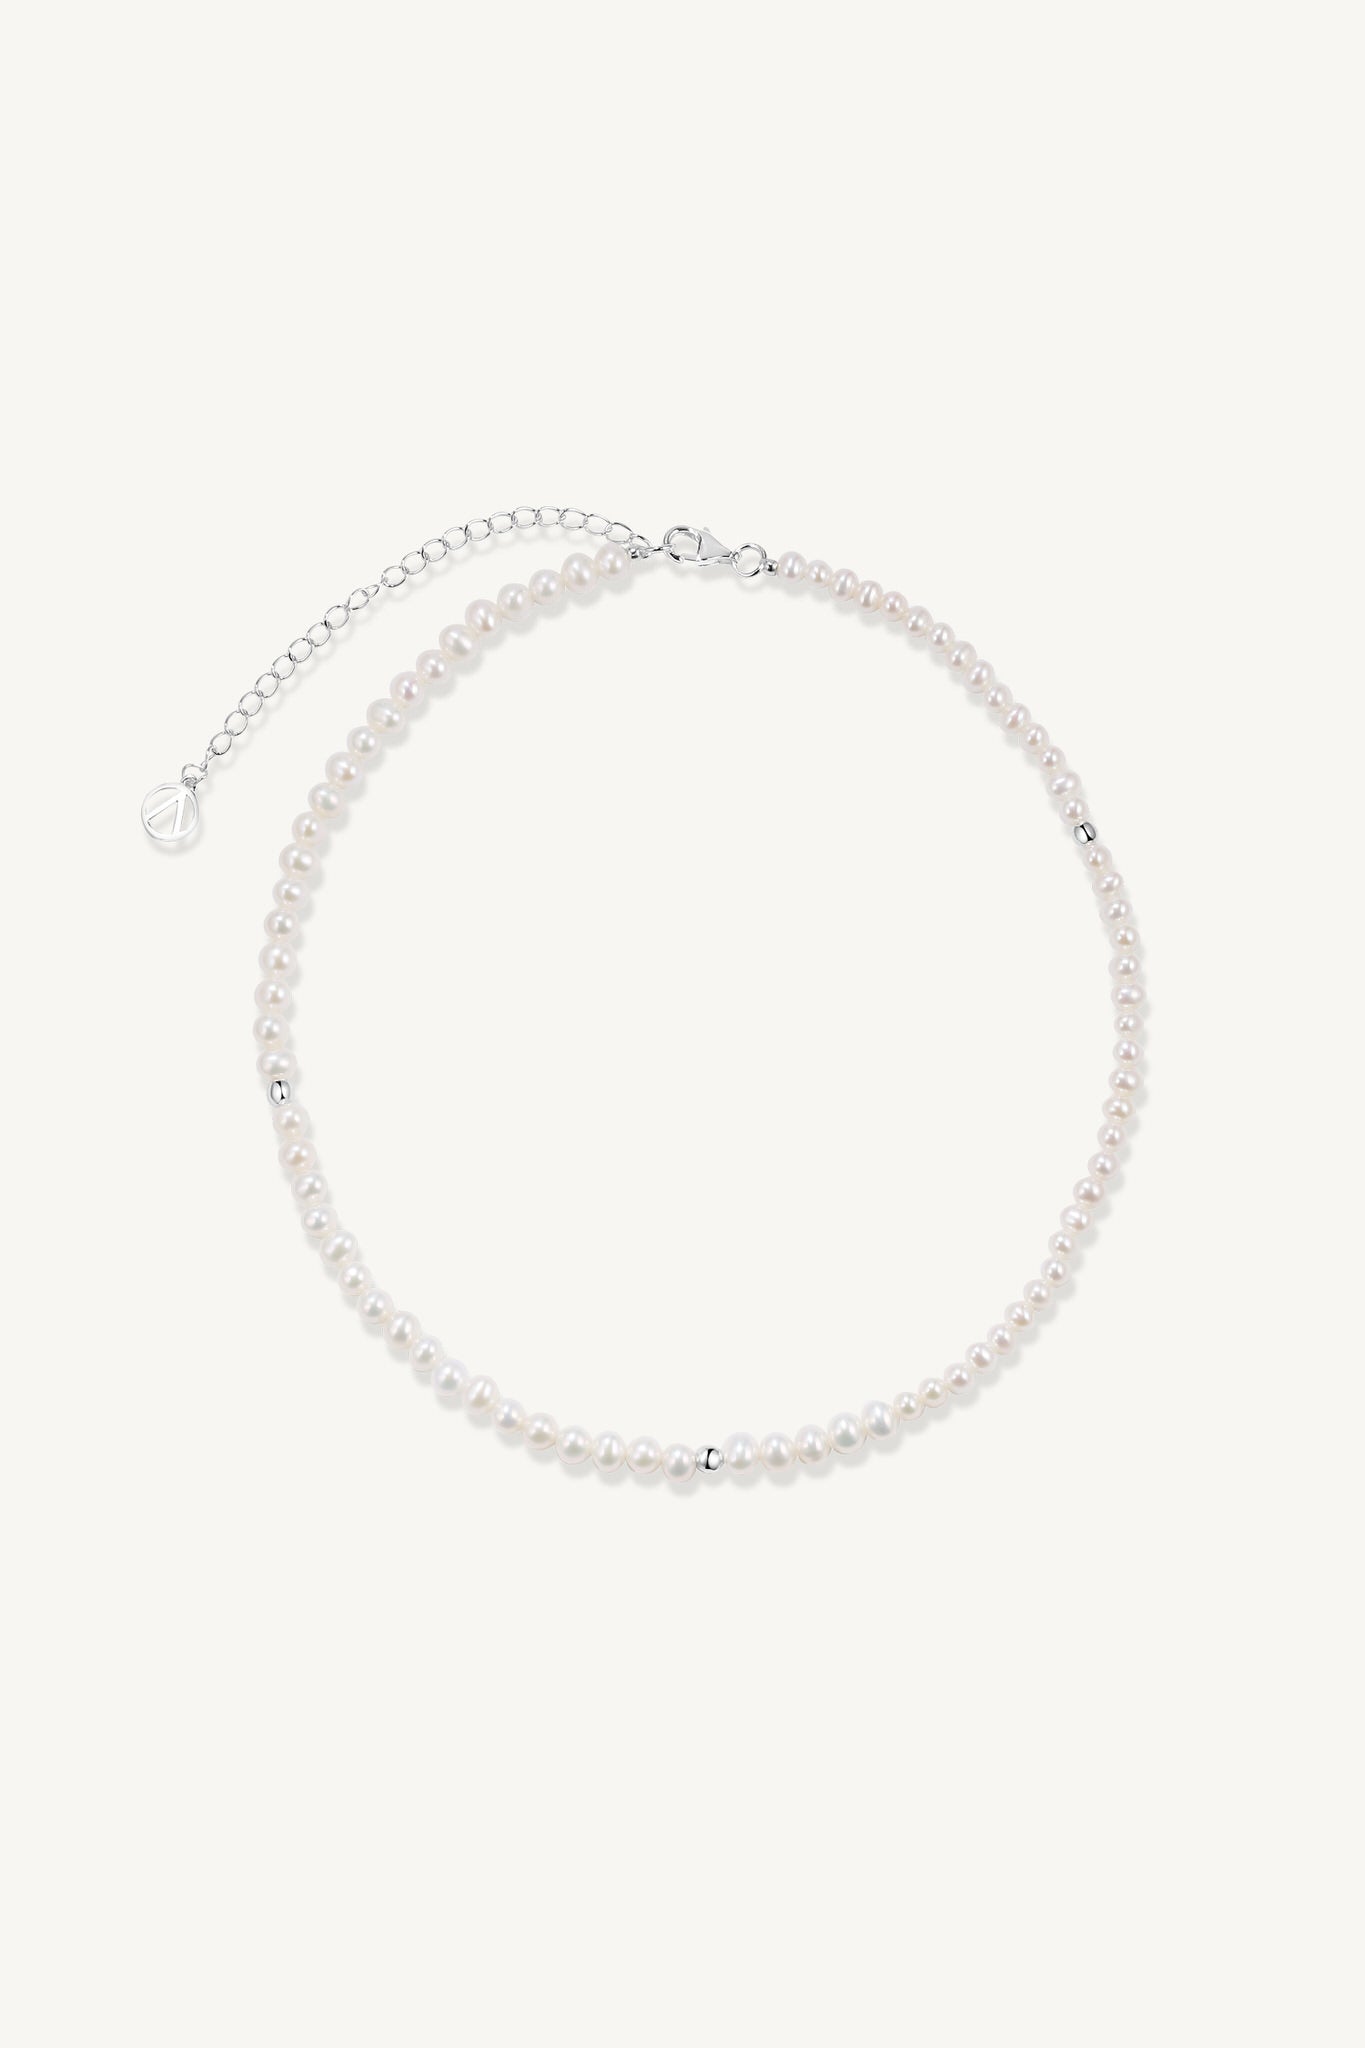 Round Freshwater Pearl with Organic Shaped Beads Choker Sterling Silver